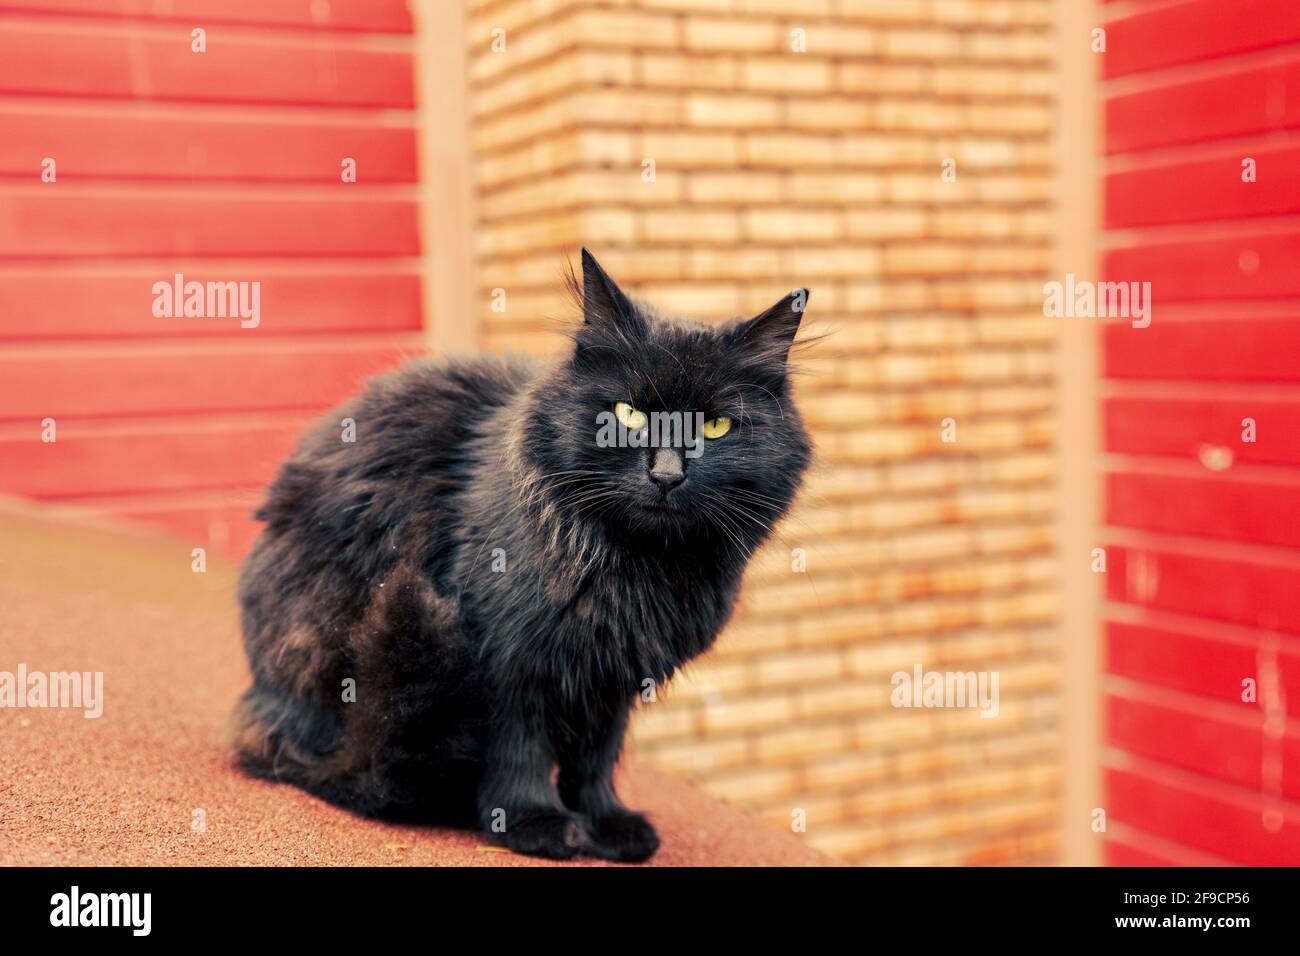 Dirty black long fur stray cat looking at lens with red-orange brick outdoor background. Stock Photo